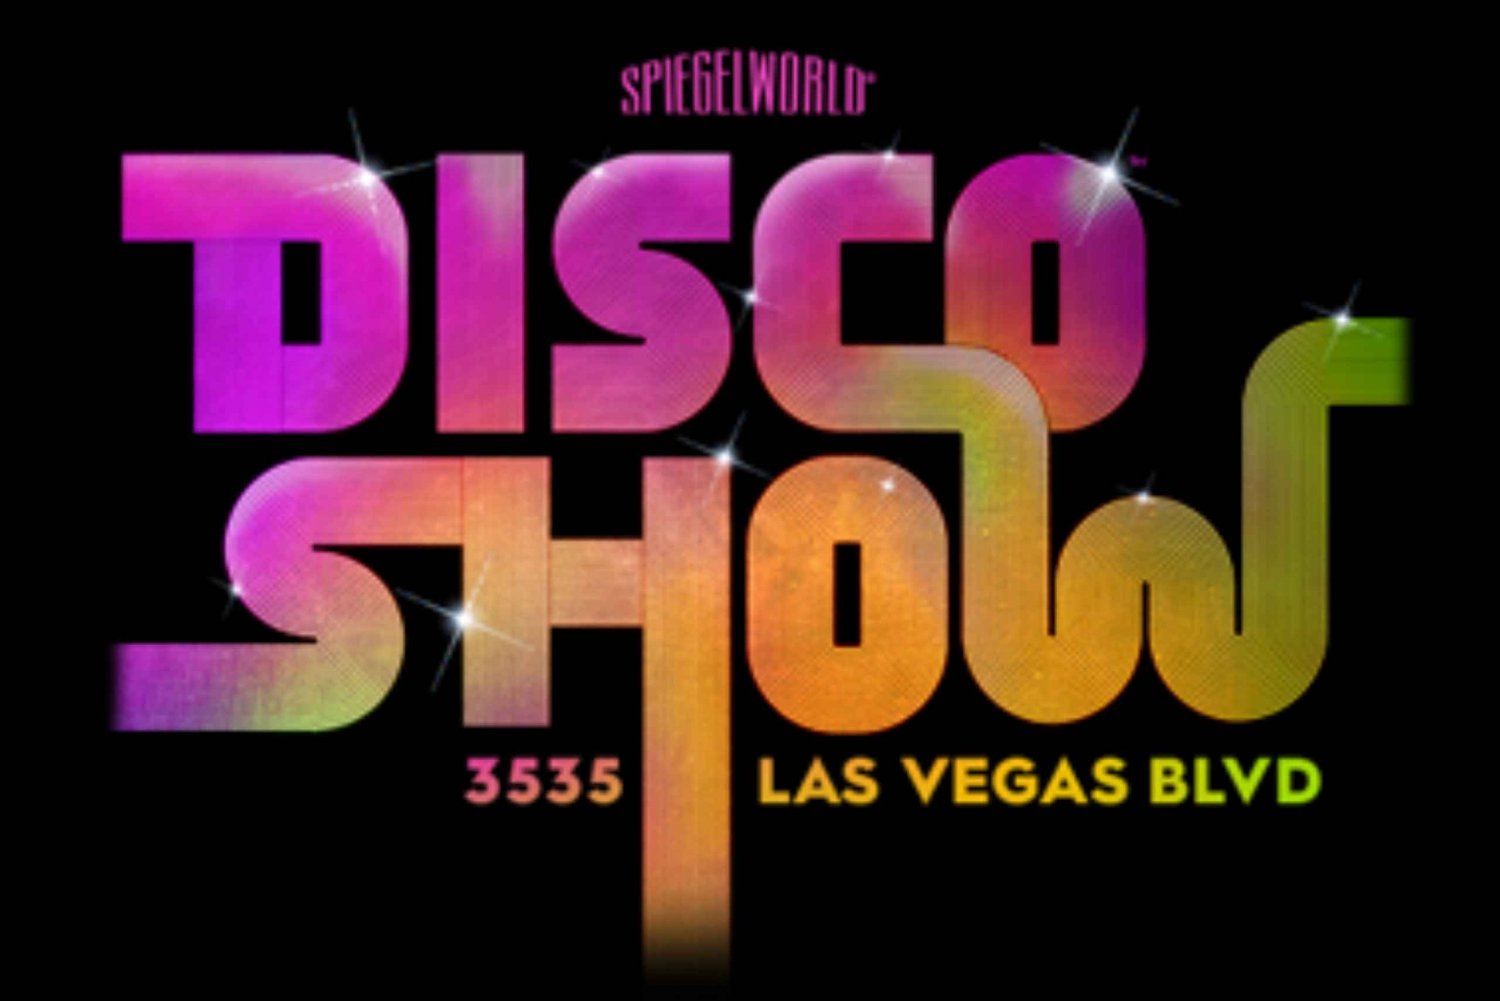 Las Vegas: DiscoShow at the LINQ Hotel